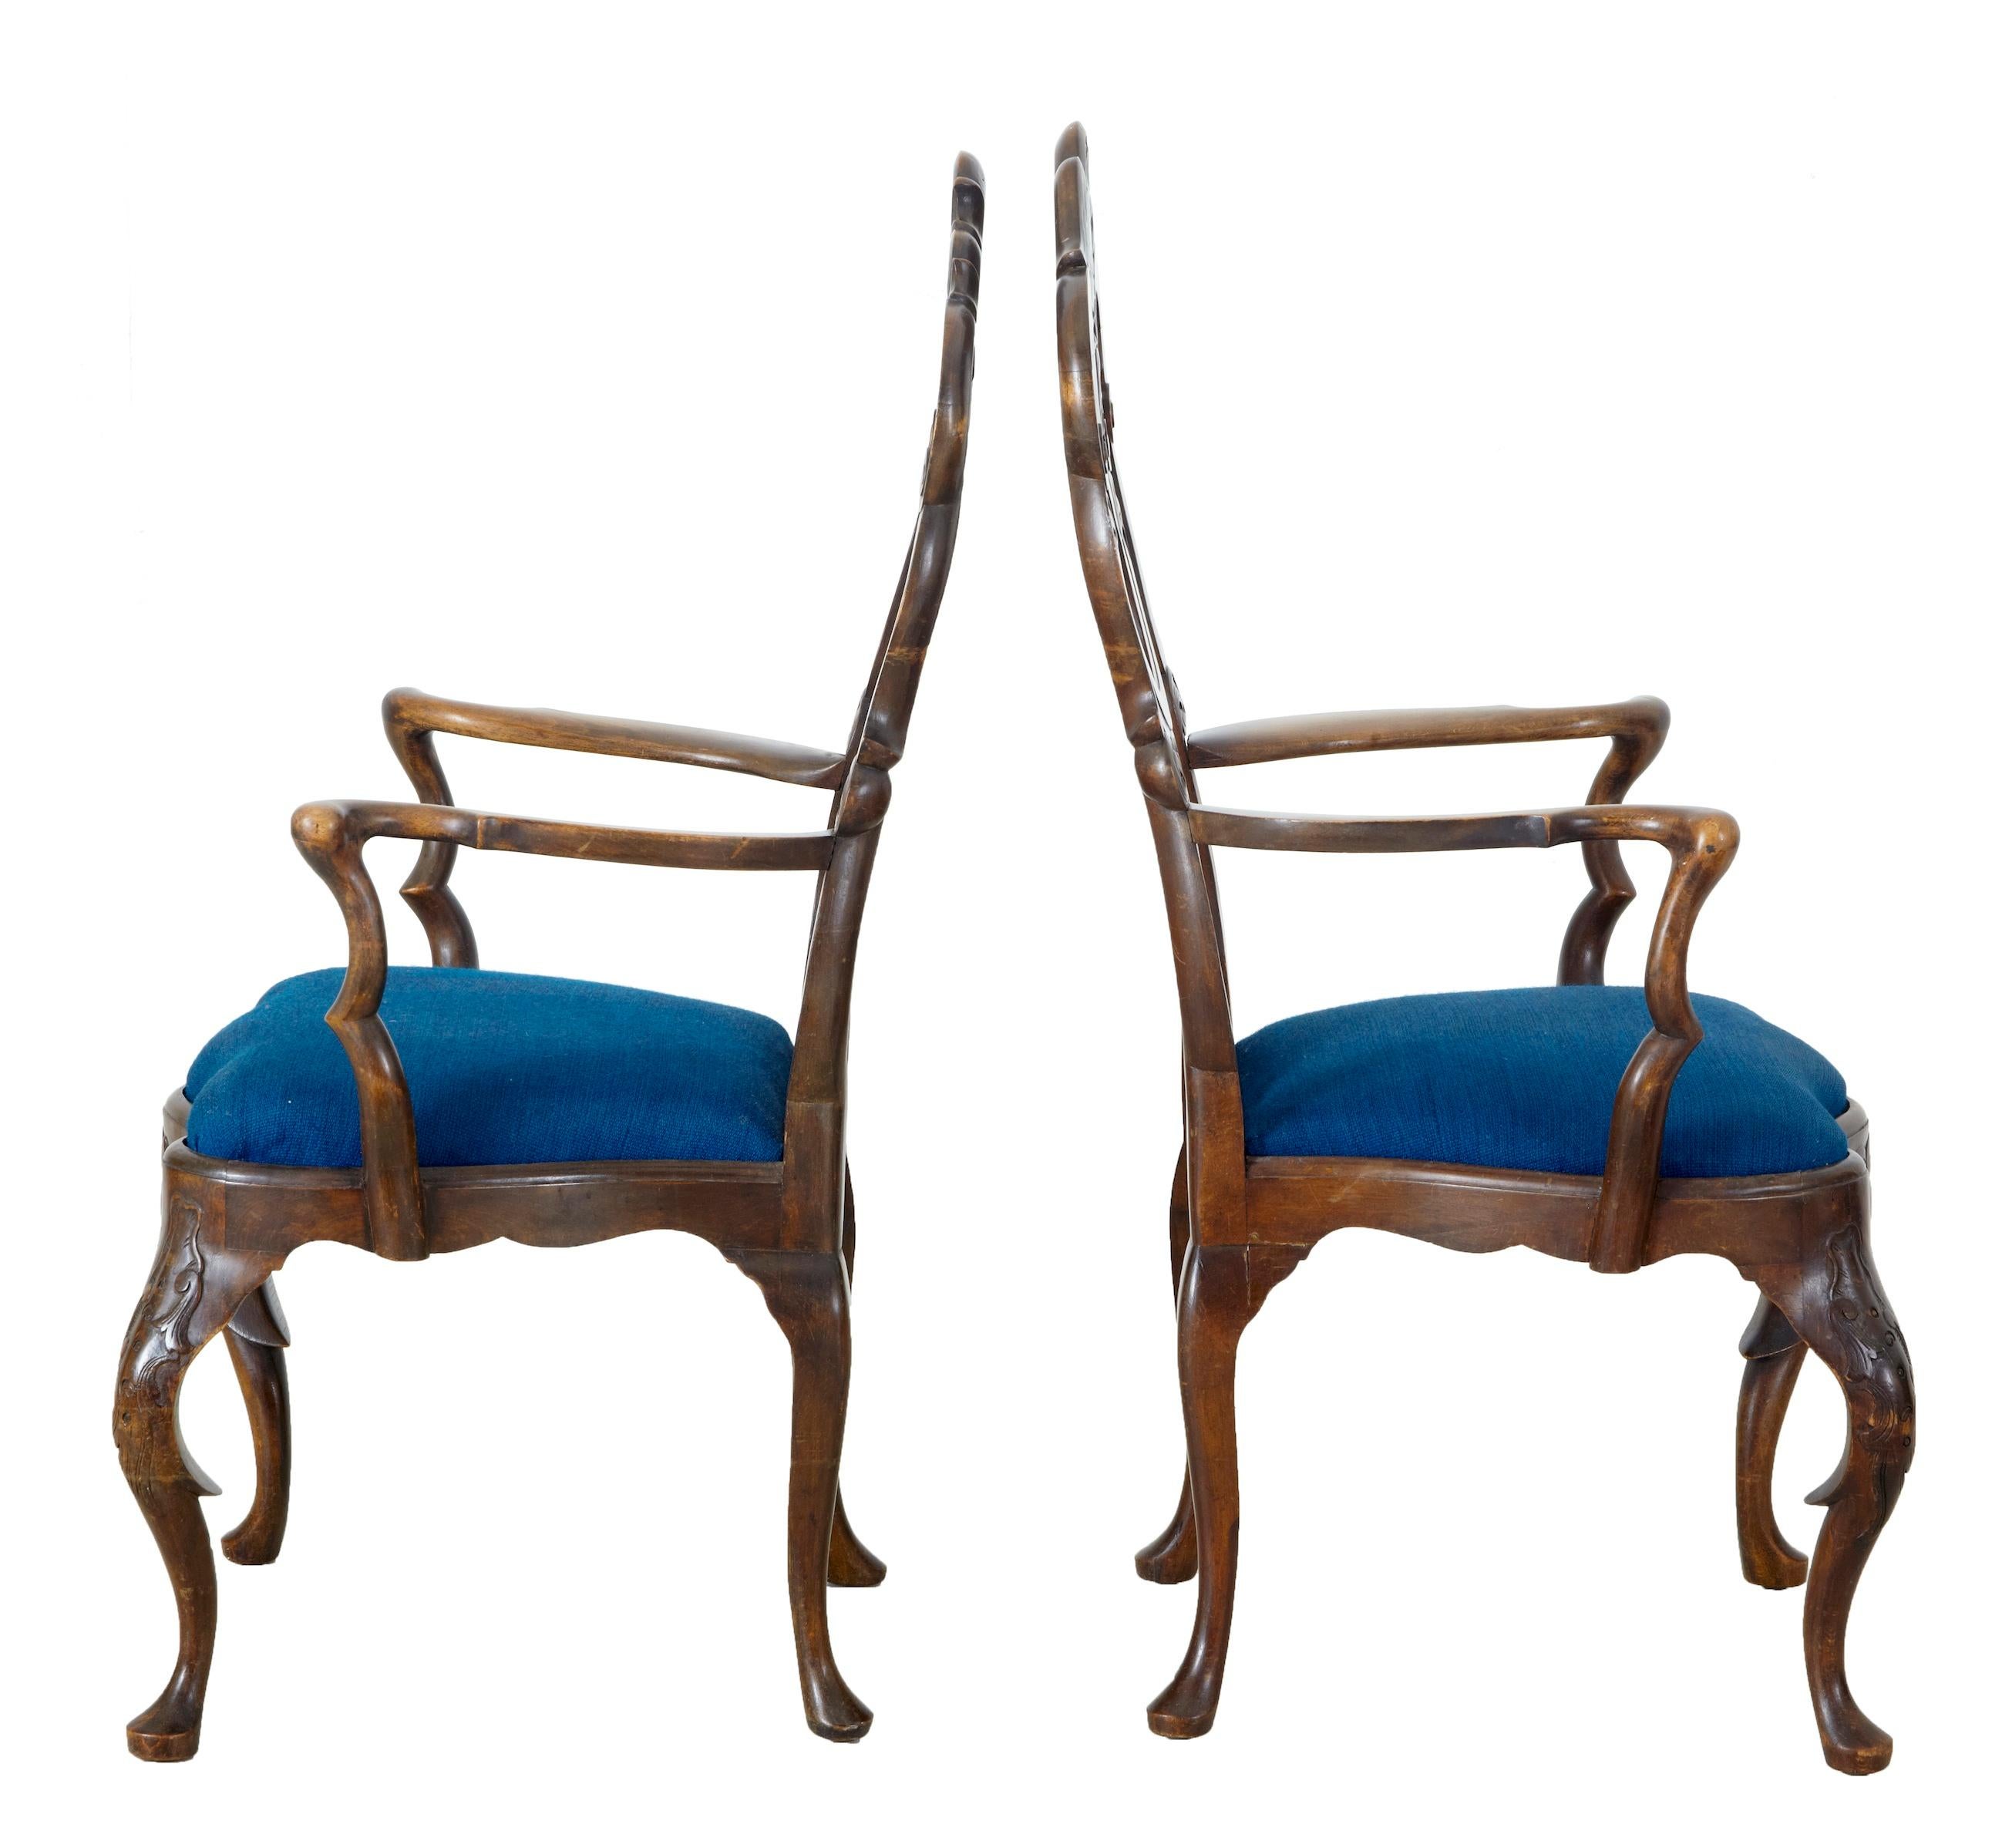 Fine pair of carved armchairs, possibly Dutch, circa 1820.
Beautifully joined swags and carved back, with a small heart formed in the lower section.
Shaped elbow arms, leading down to the later upholstered drop in seat.
Carved front apron, with